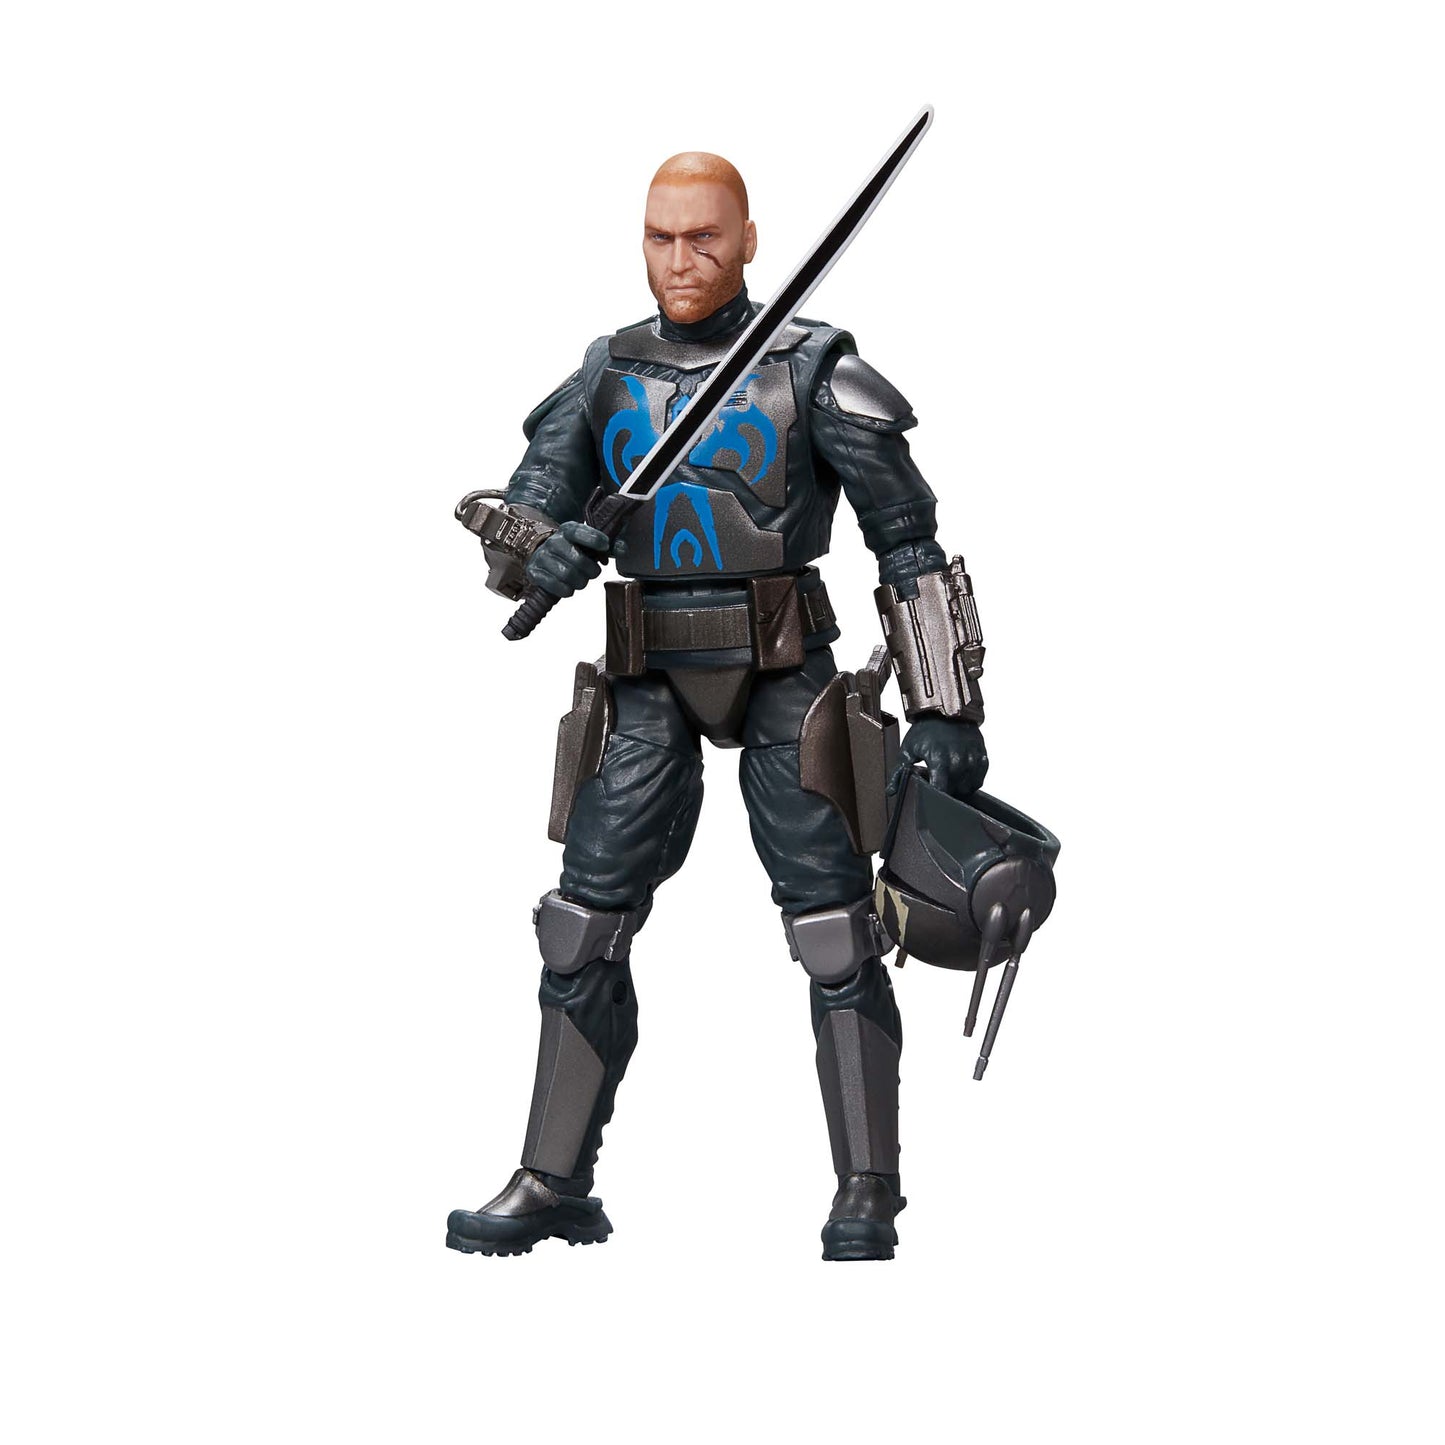 Star Wars The Black Series Pre Vizsla Action Figure Toy with sword and helmet - heretoserveyou